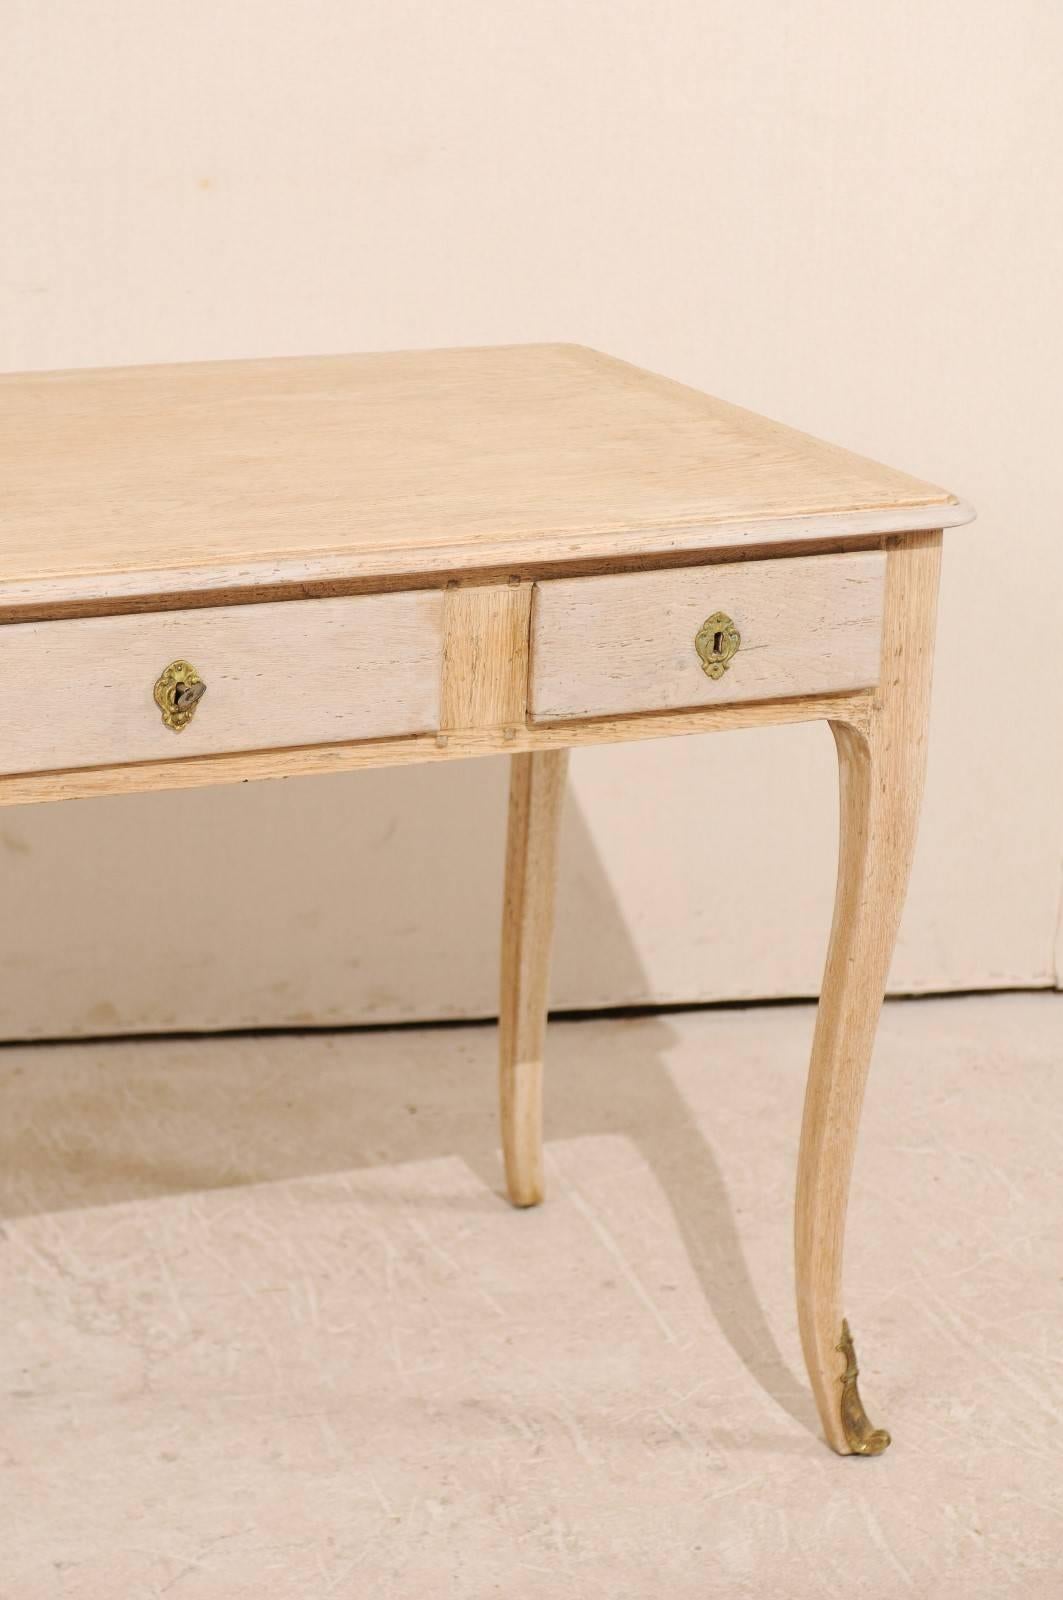 20th Century Mid-Century Desk of Bleached Oak with Cabriole Legs and Brass Accents